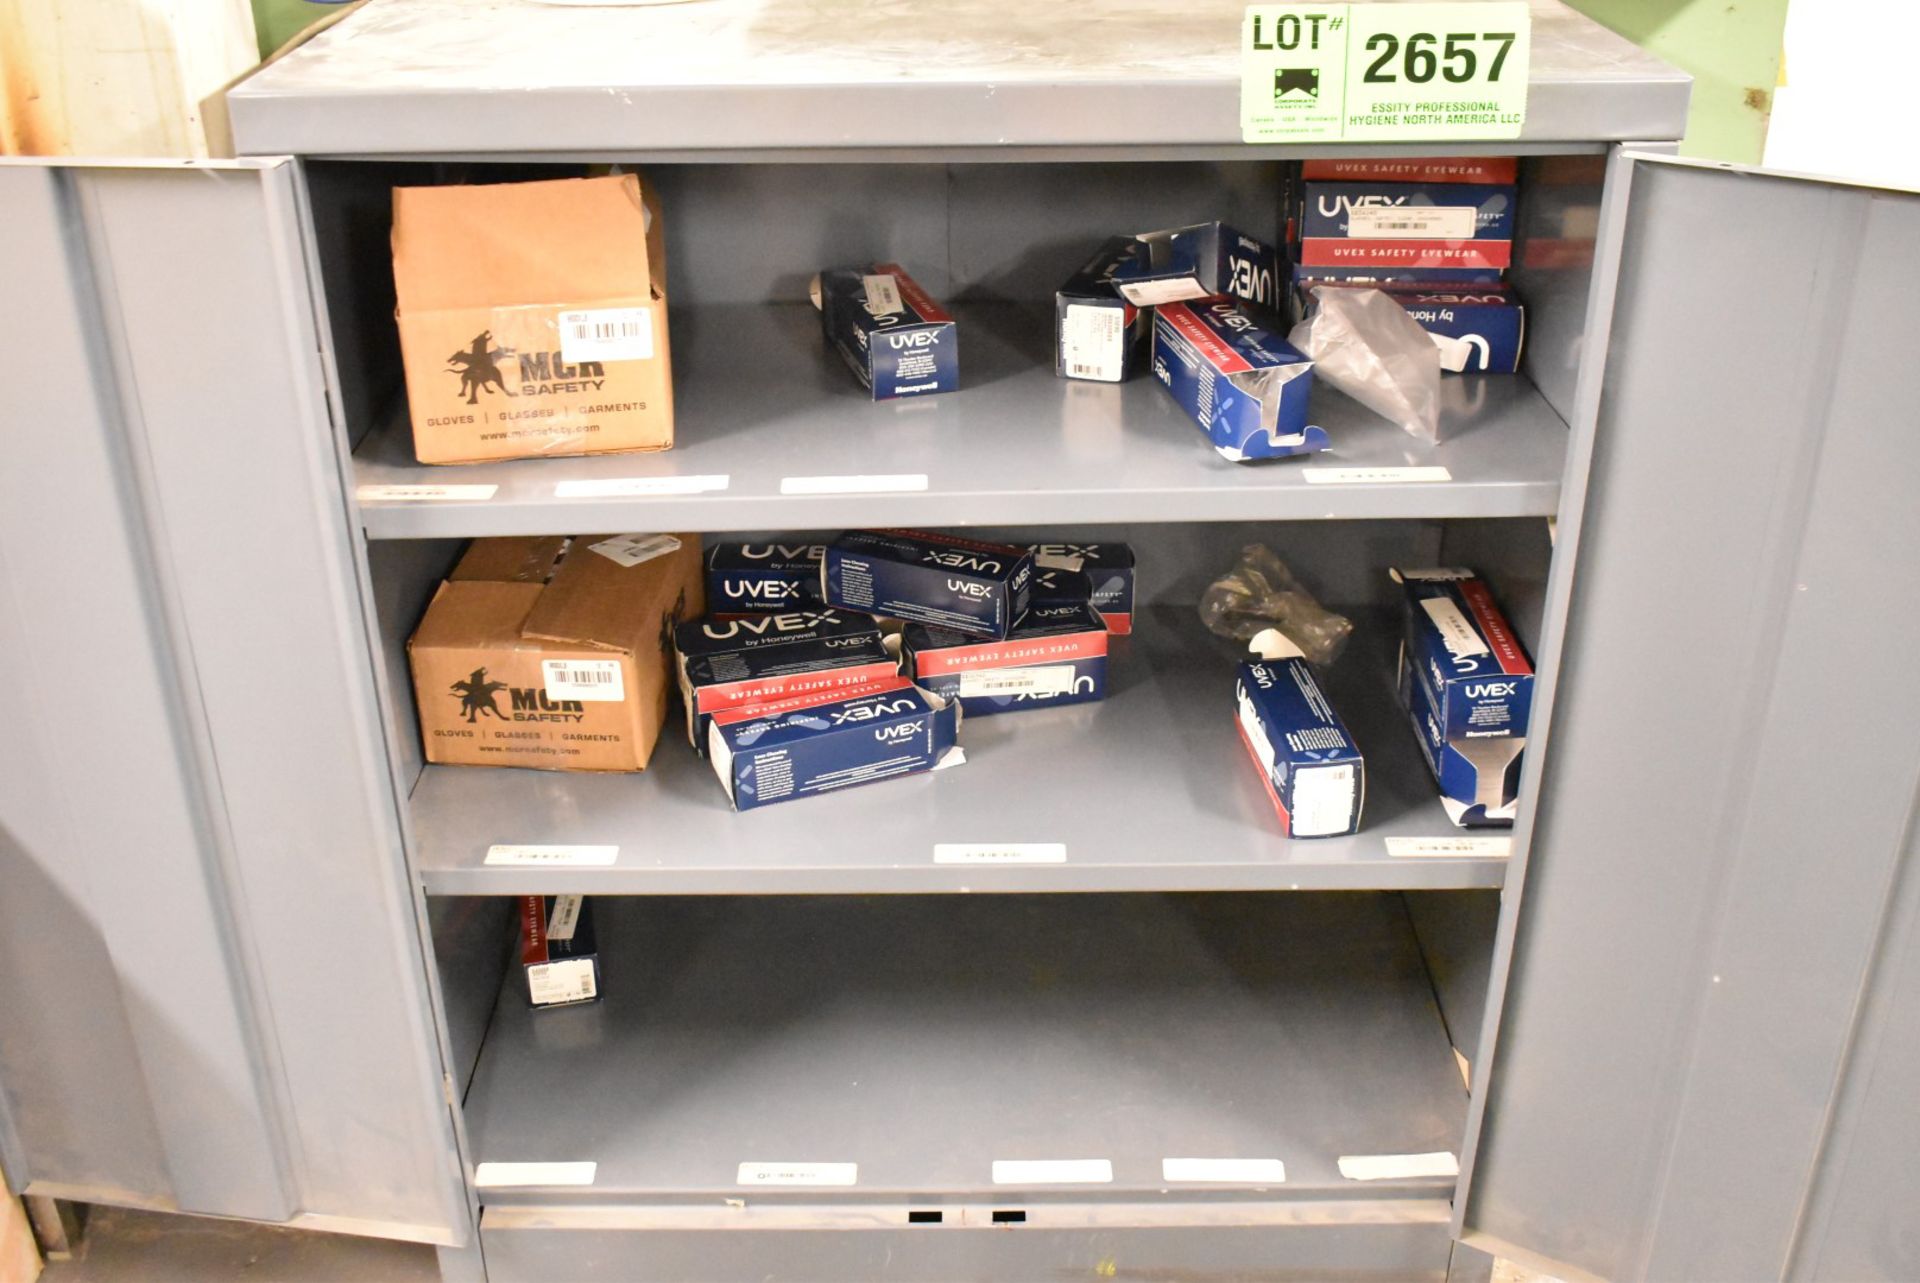 LOT/ SHOP CABINET WITH PPE [RIGGING FEES FOR LOT #2657 - $100 USD PLUS APPLICABLE TAXES]